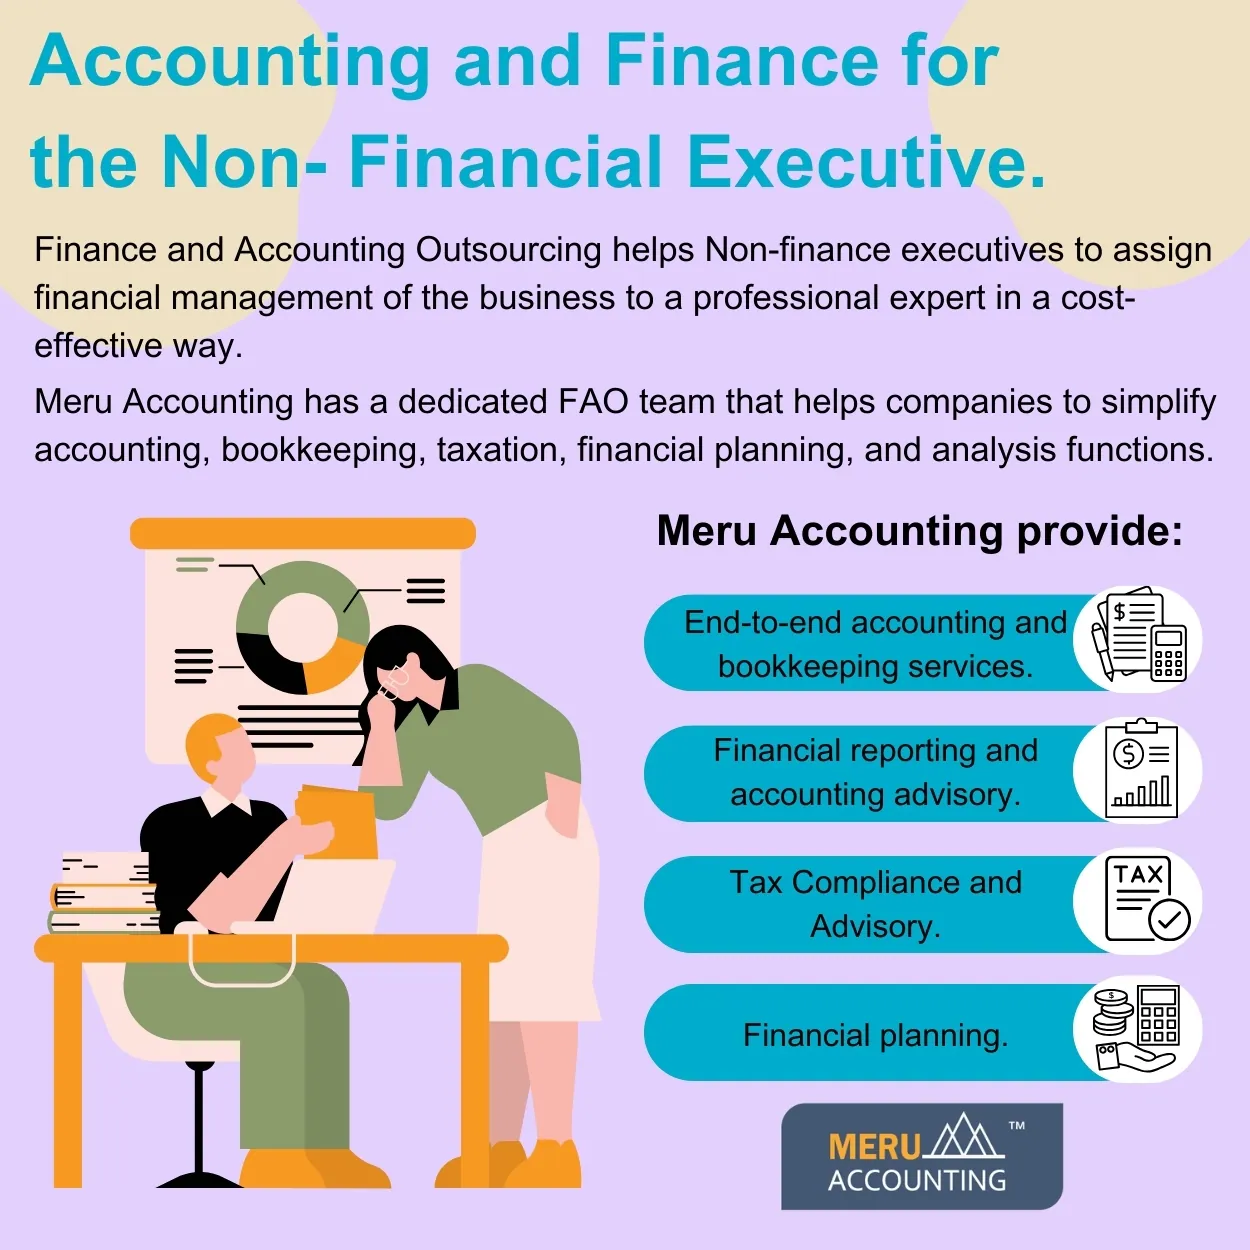 outsourced finance and accounting services